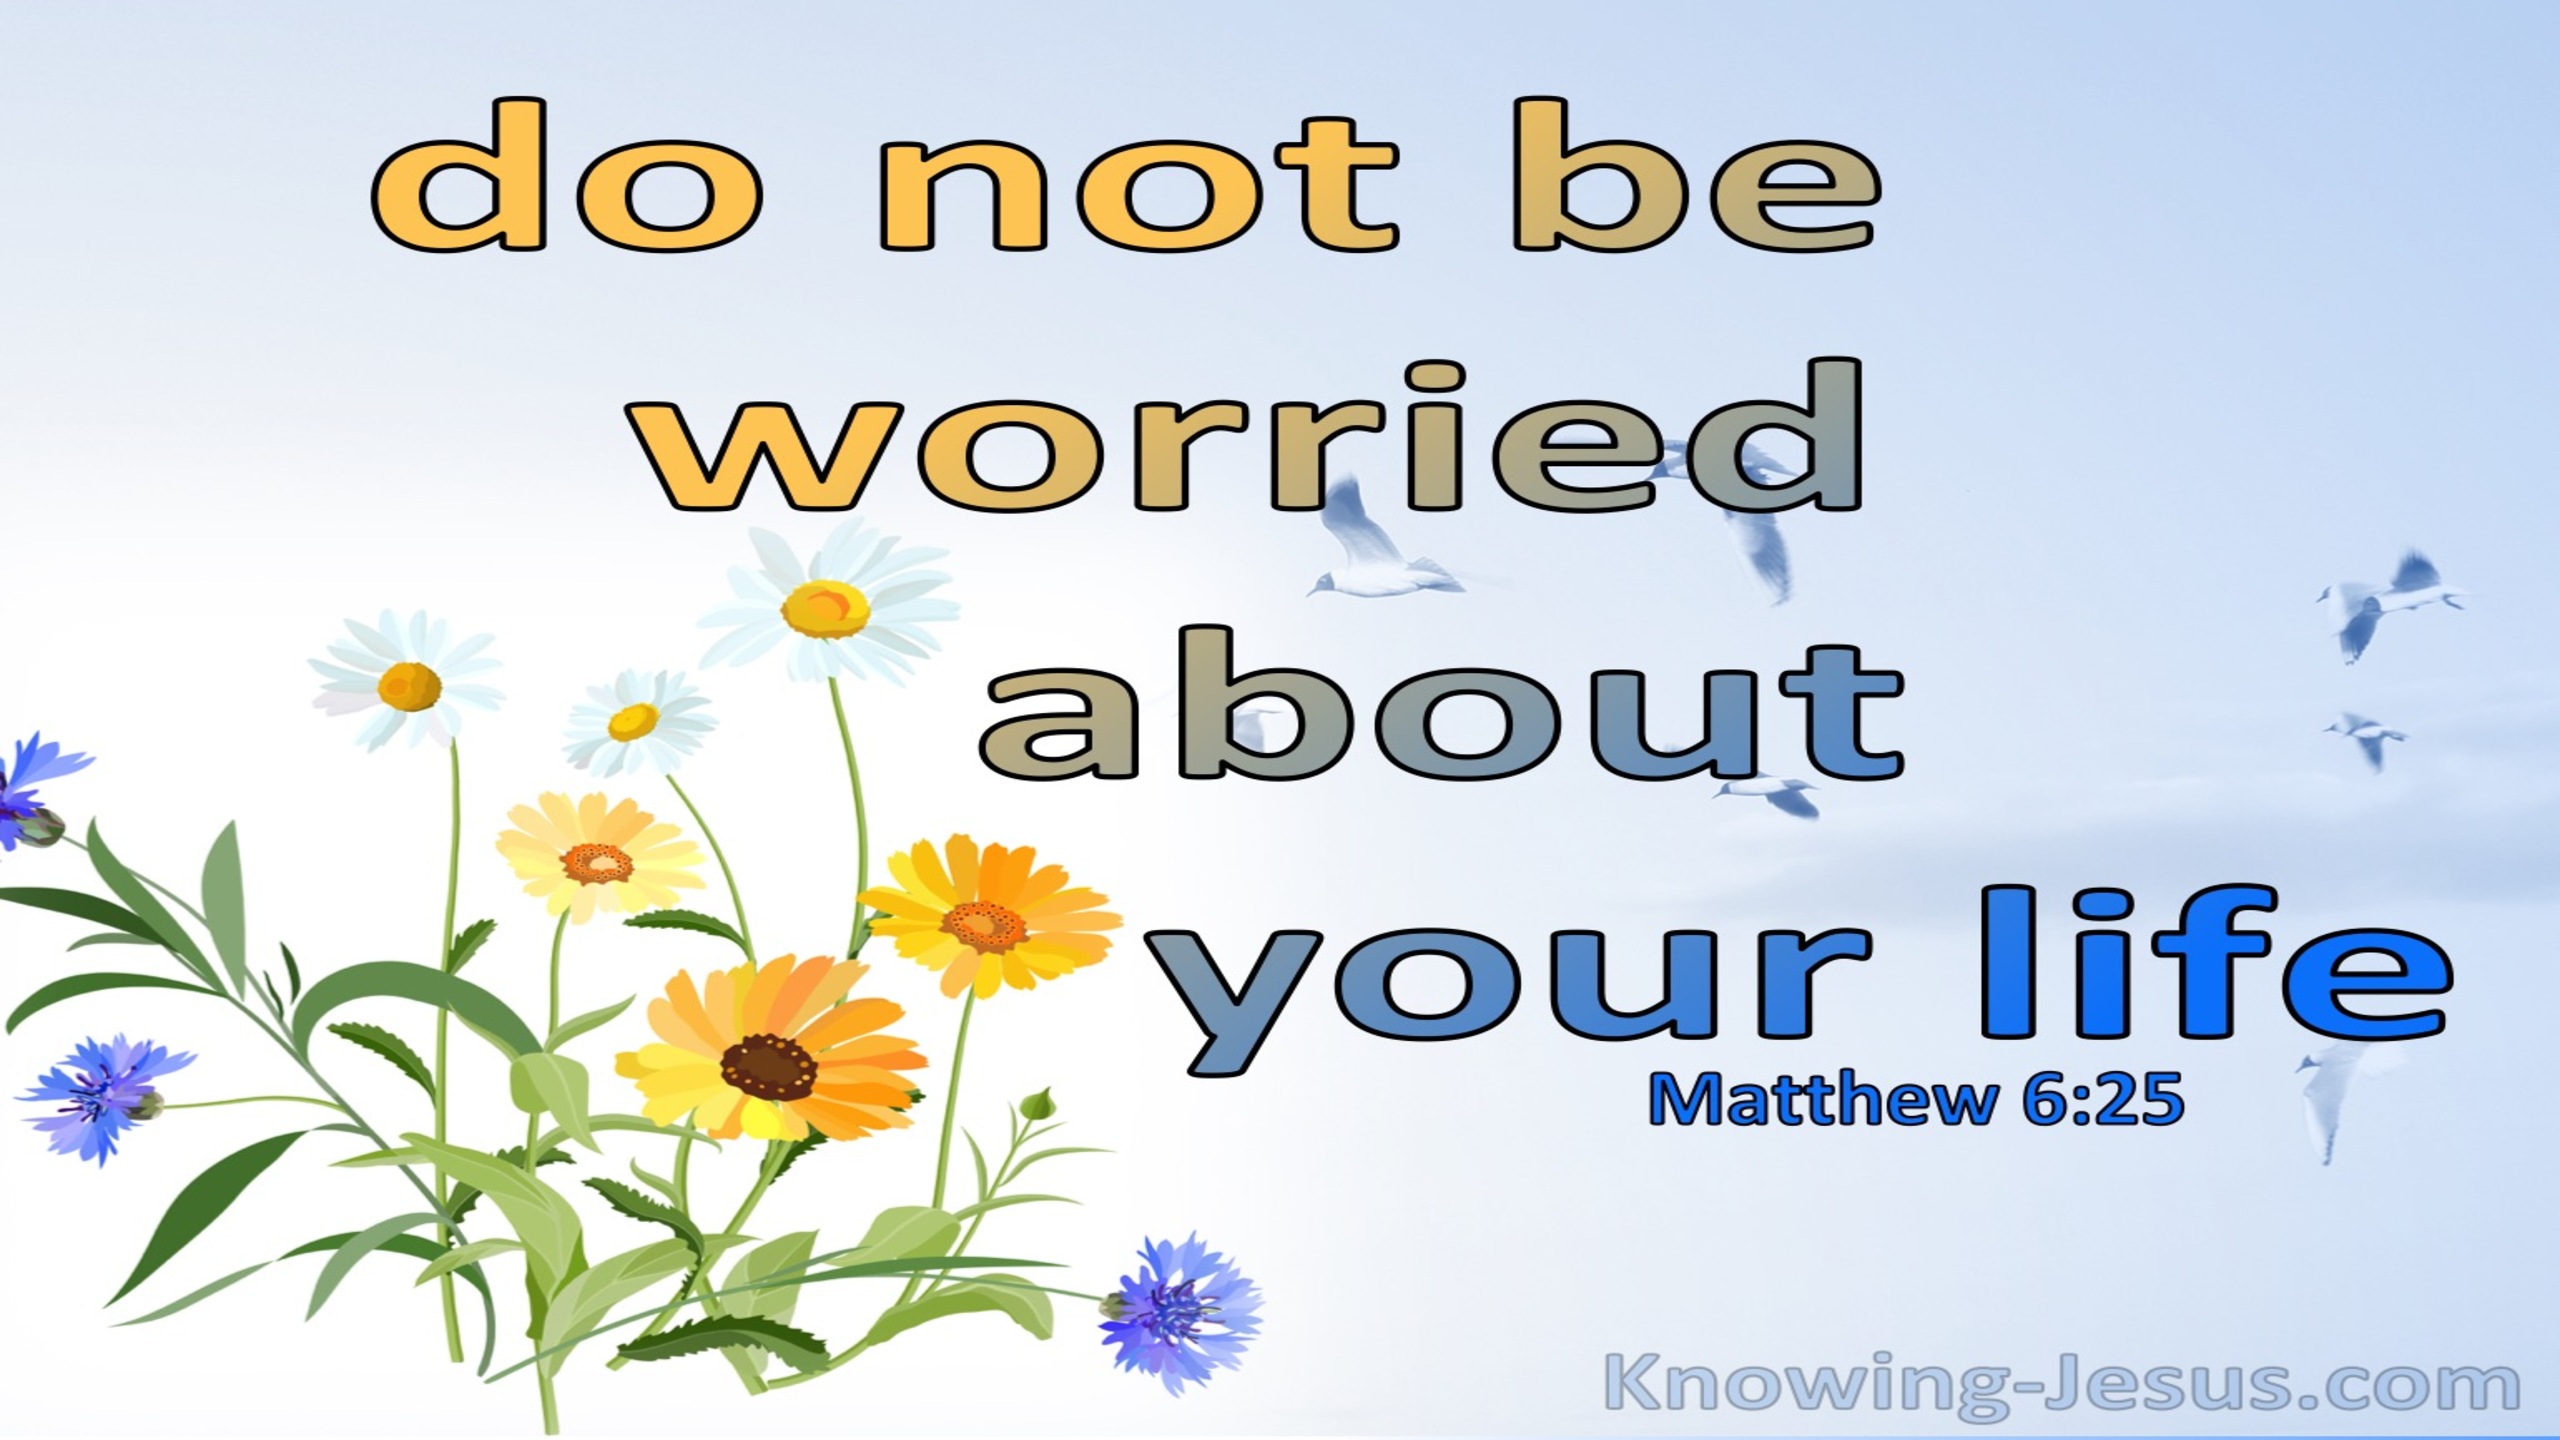 Matthew 6:25 Do Not Be Worried About Your Life (yellow) 